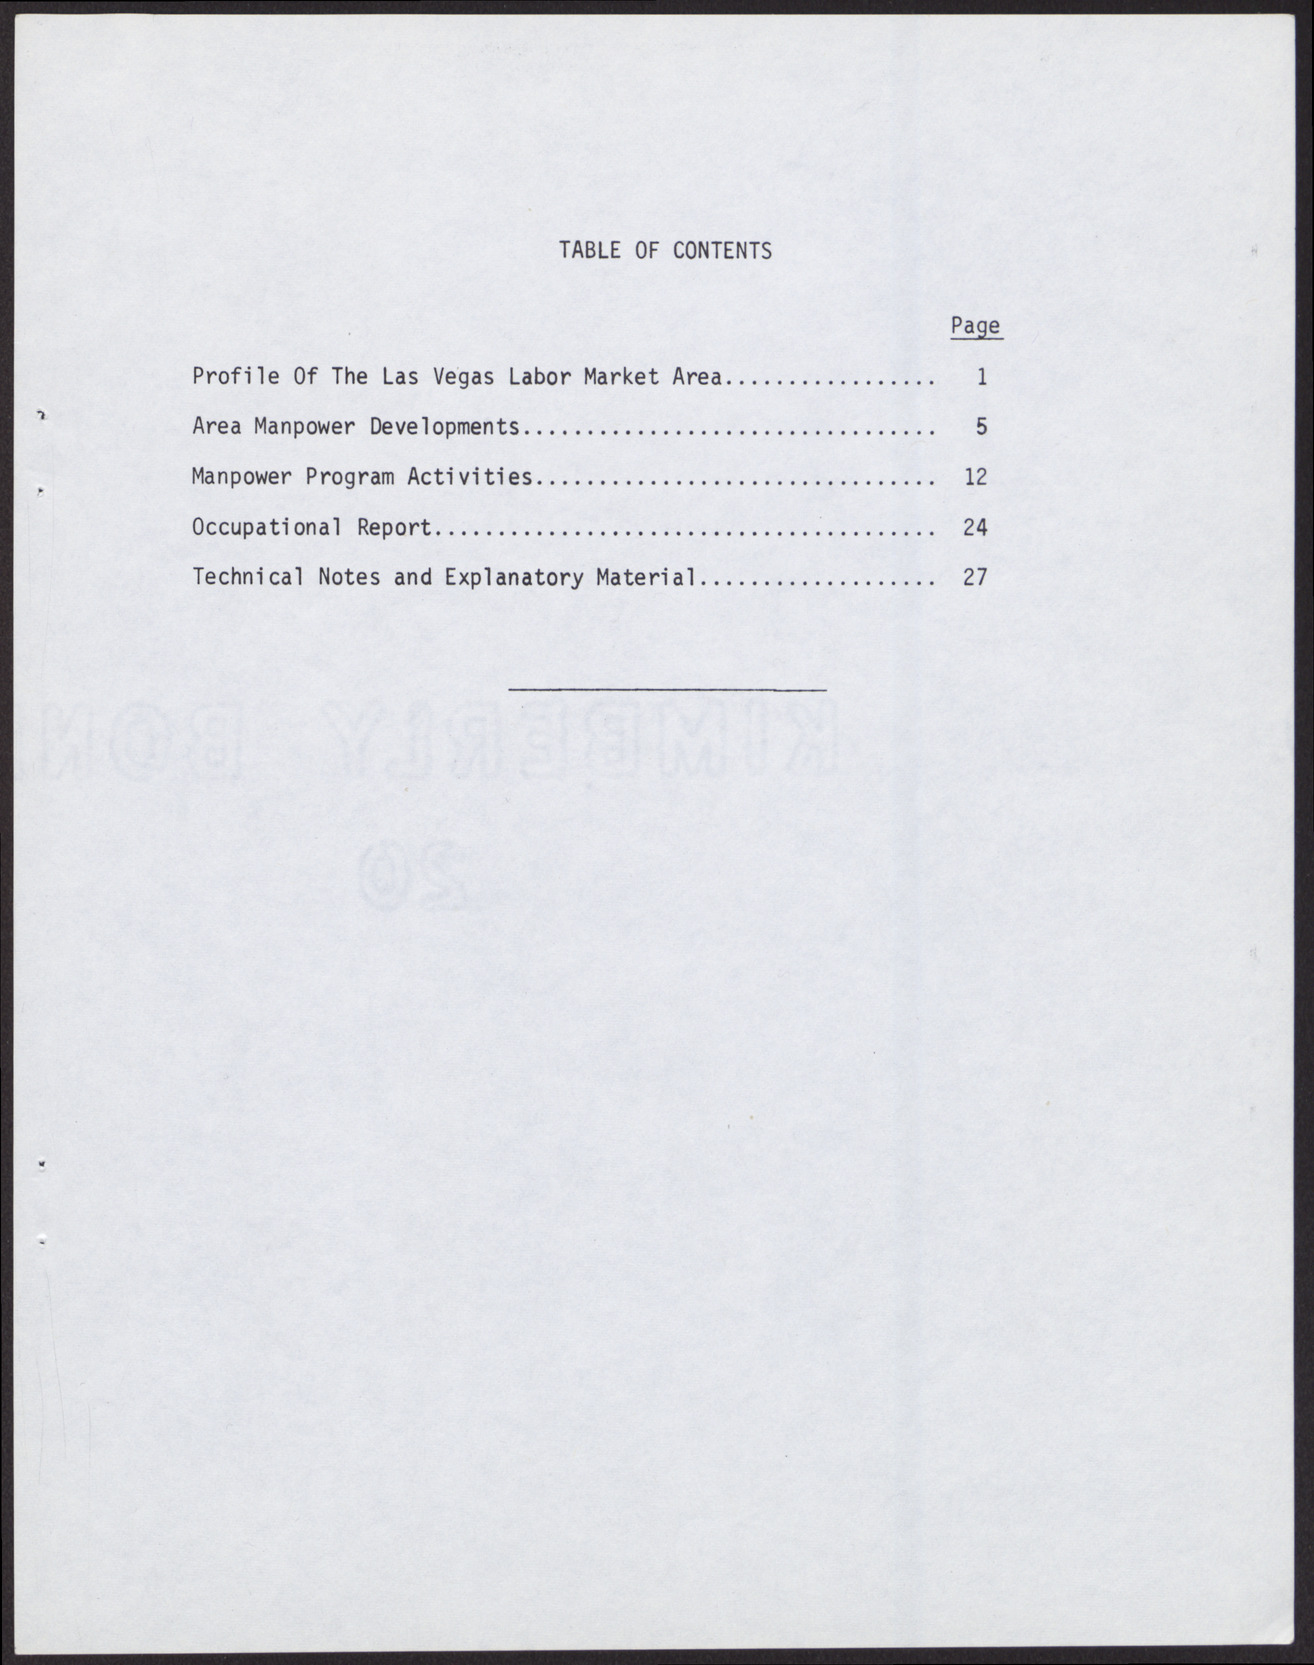 Semi-annual Area Manpower Review (16 pages), Fall 1969, page 3